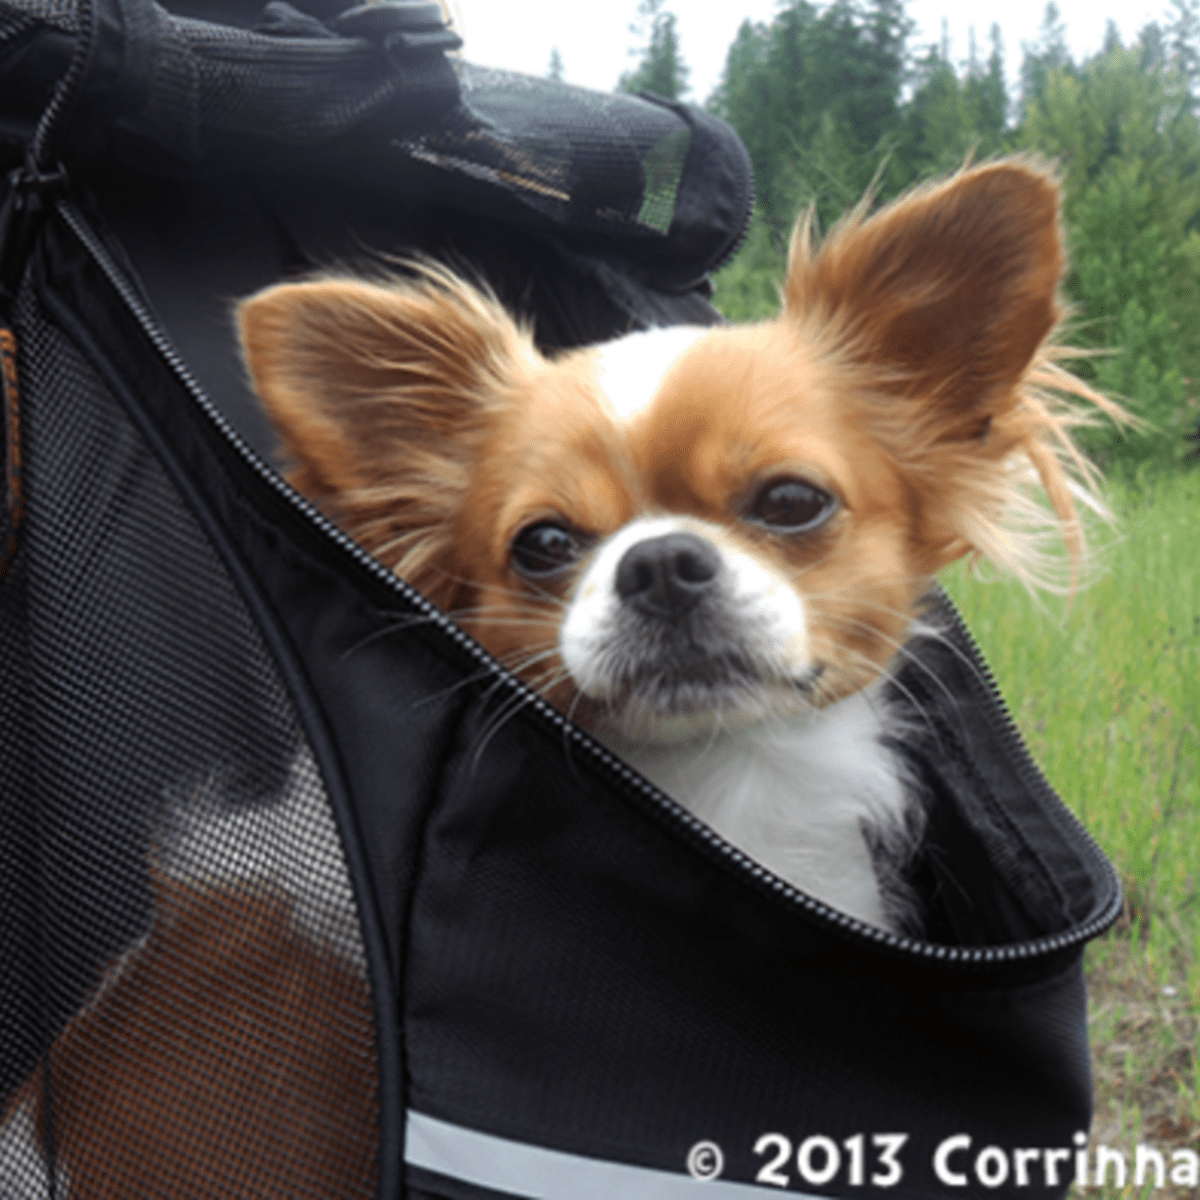 https://images.saymedia-content.com/.image/ar_1:1%2Cc_fill%2Ccs_srgb%2Cq_auto:eco%2Cw_1200/MTk2NDM2MDQzMTk5Njg1Nzgy/the-outward-hound-backpack-pet-carrier.png